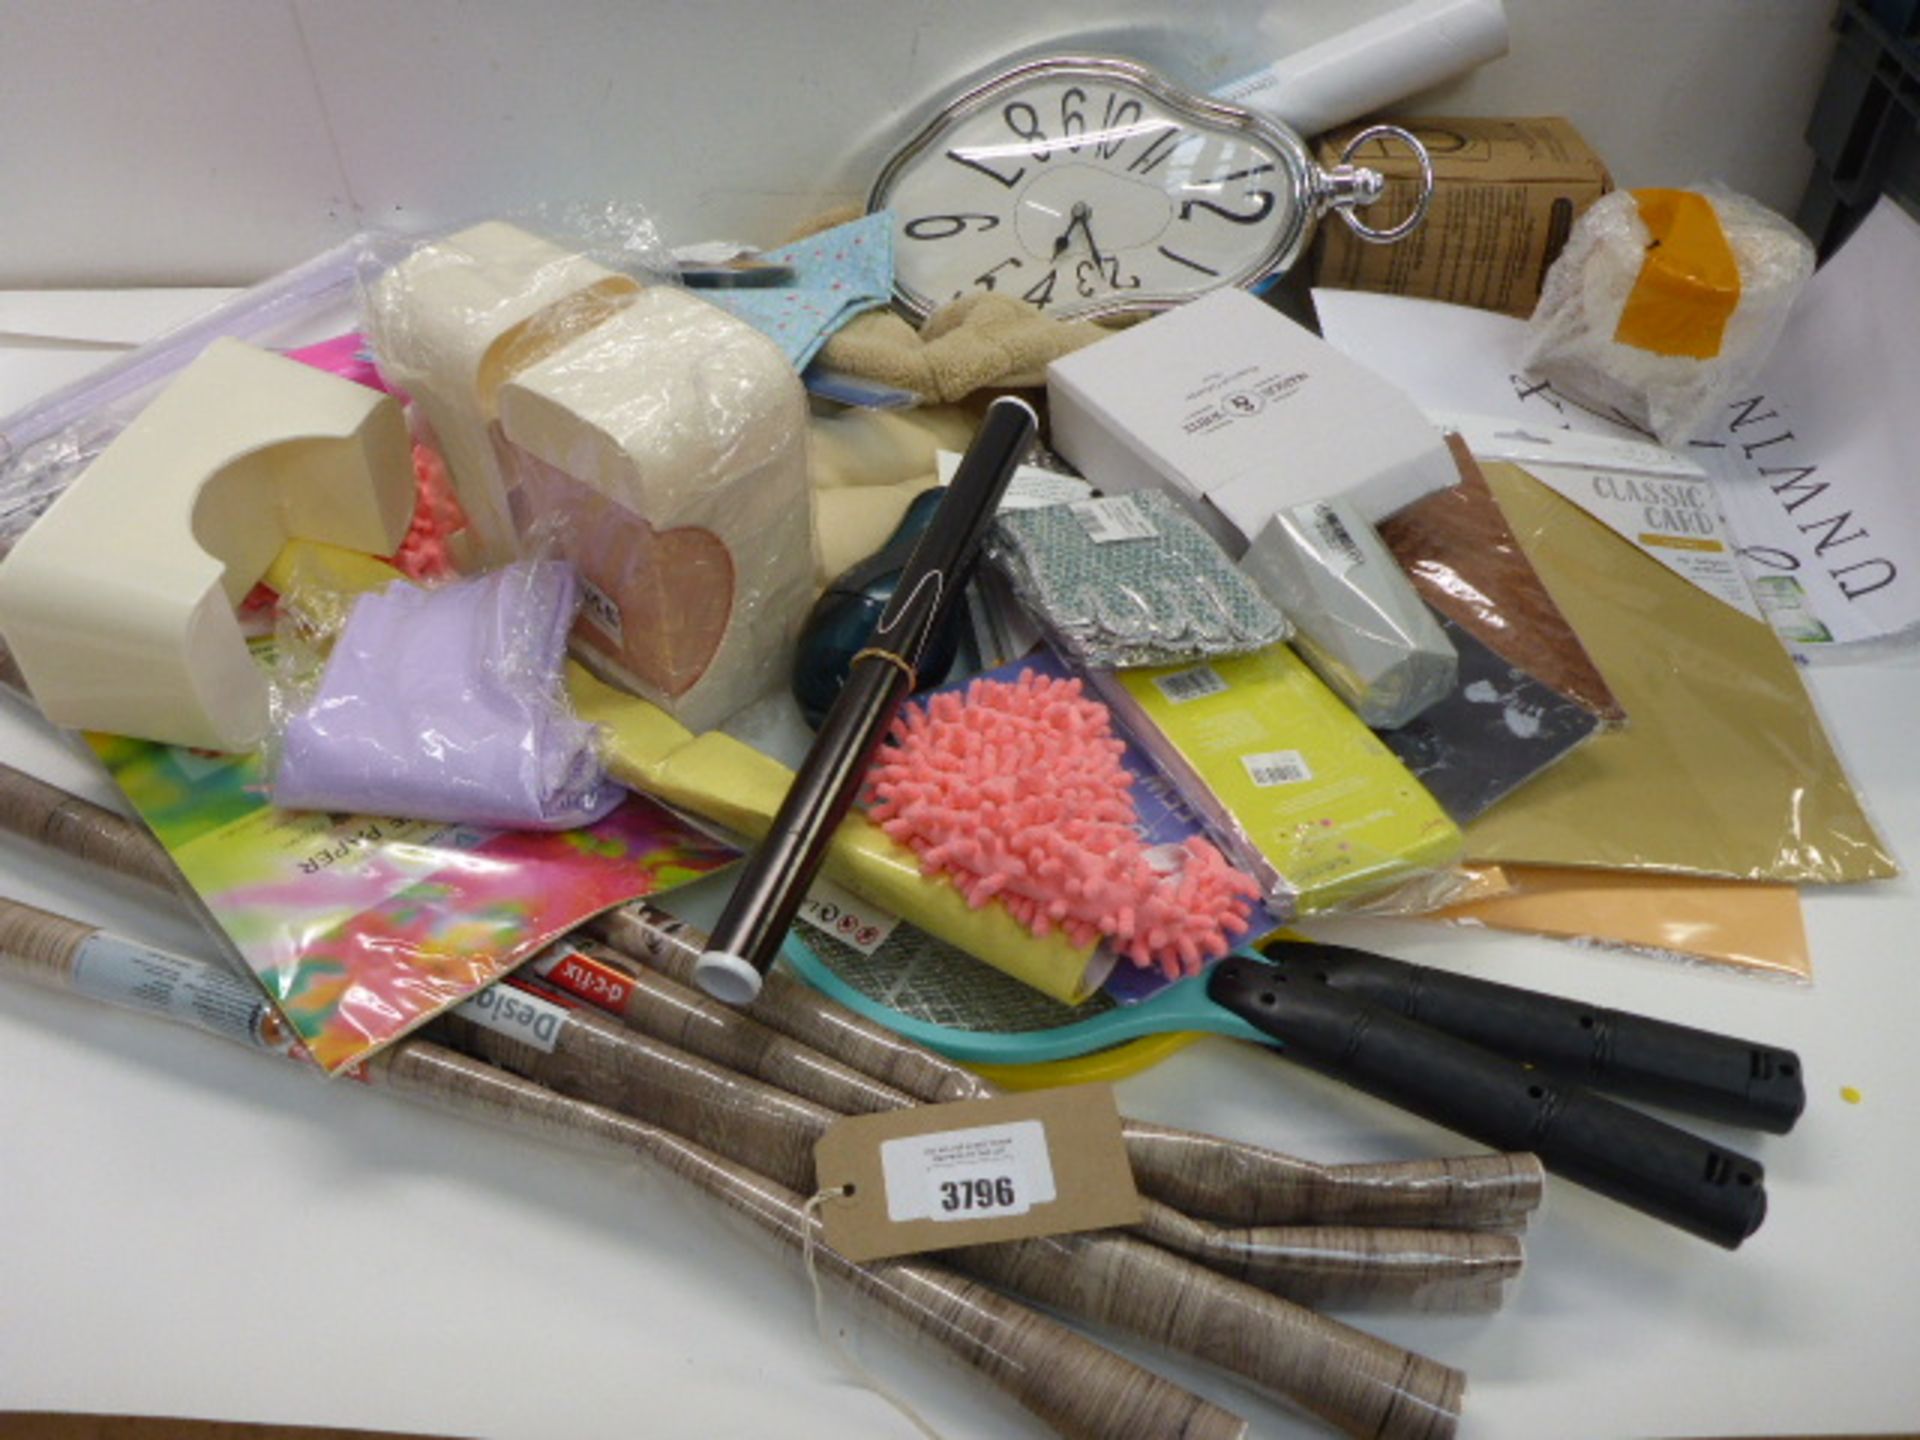 Large bag of household sundries, sticky back plastic, wonky clock, craft paper etc